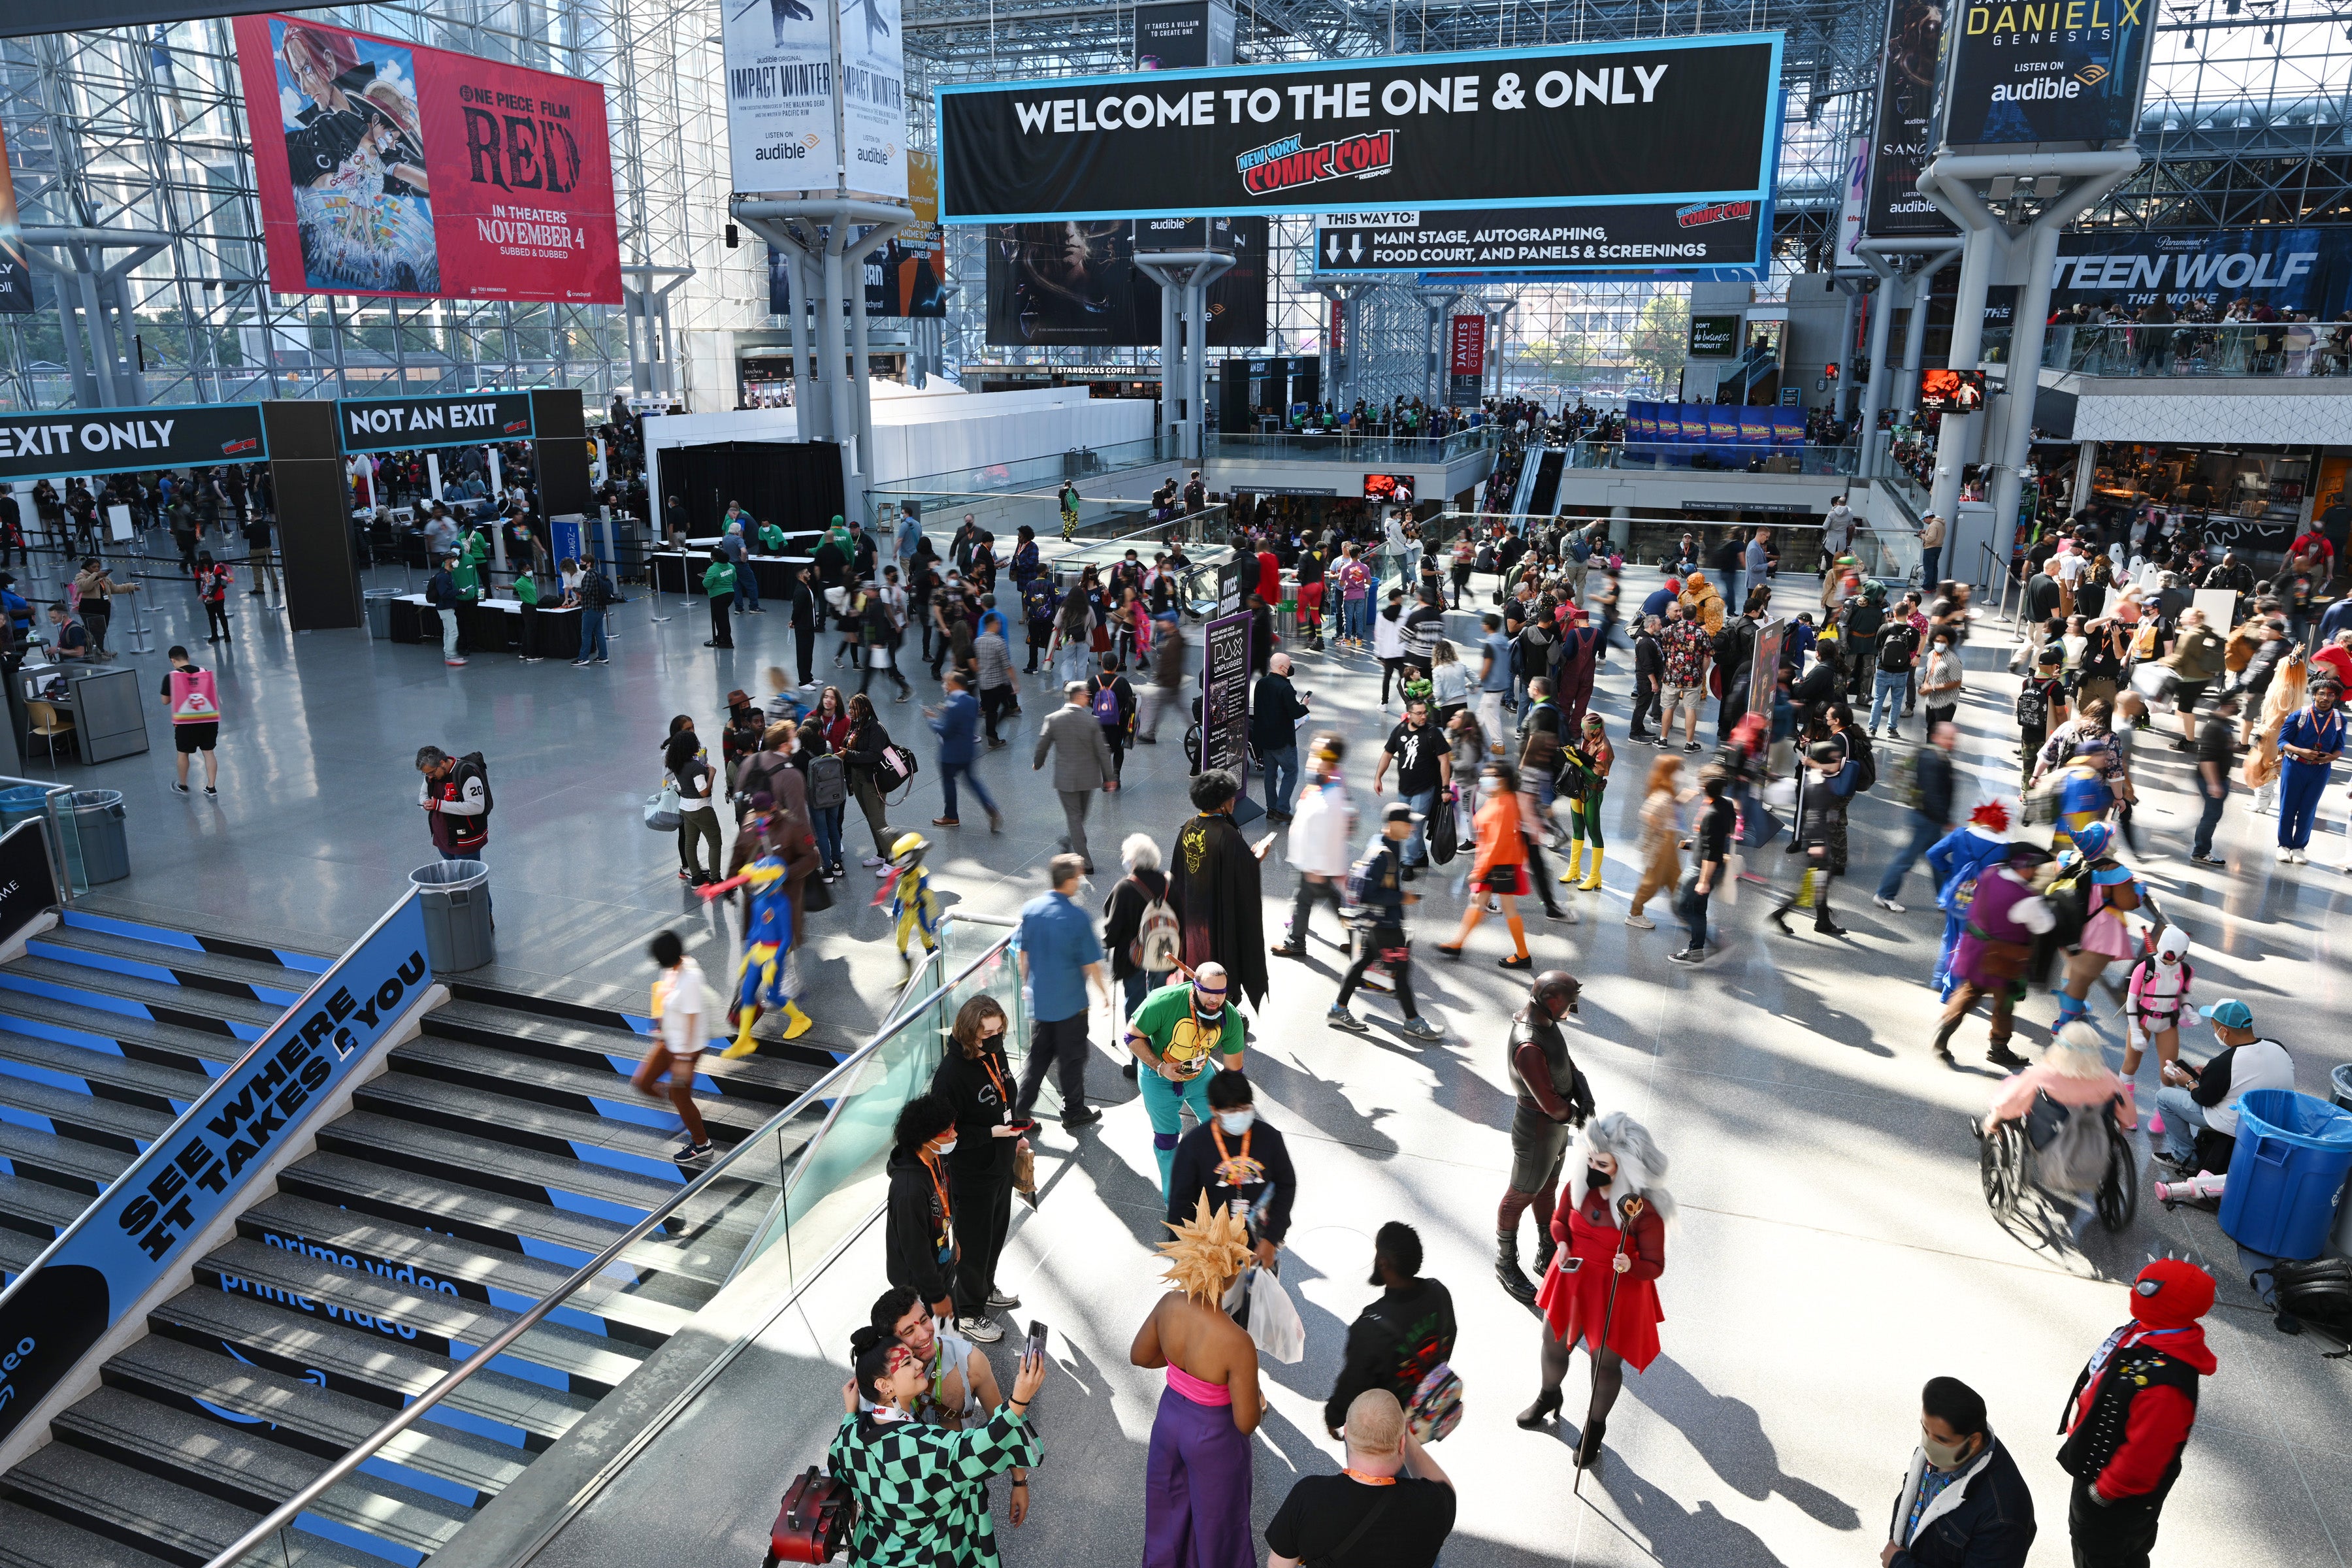 Photograph of interior of Javits center during NYCC 2022 featuring people walking